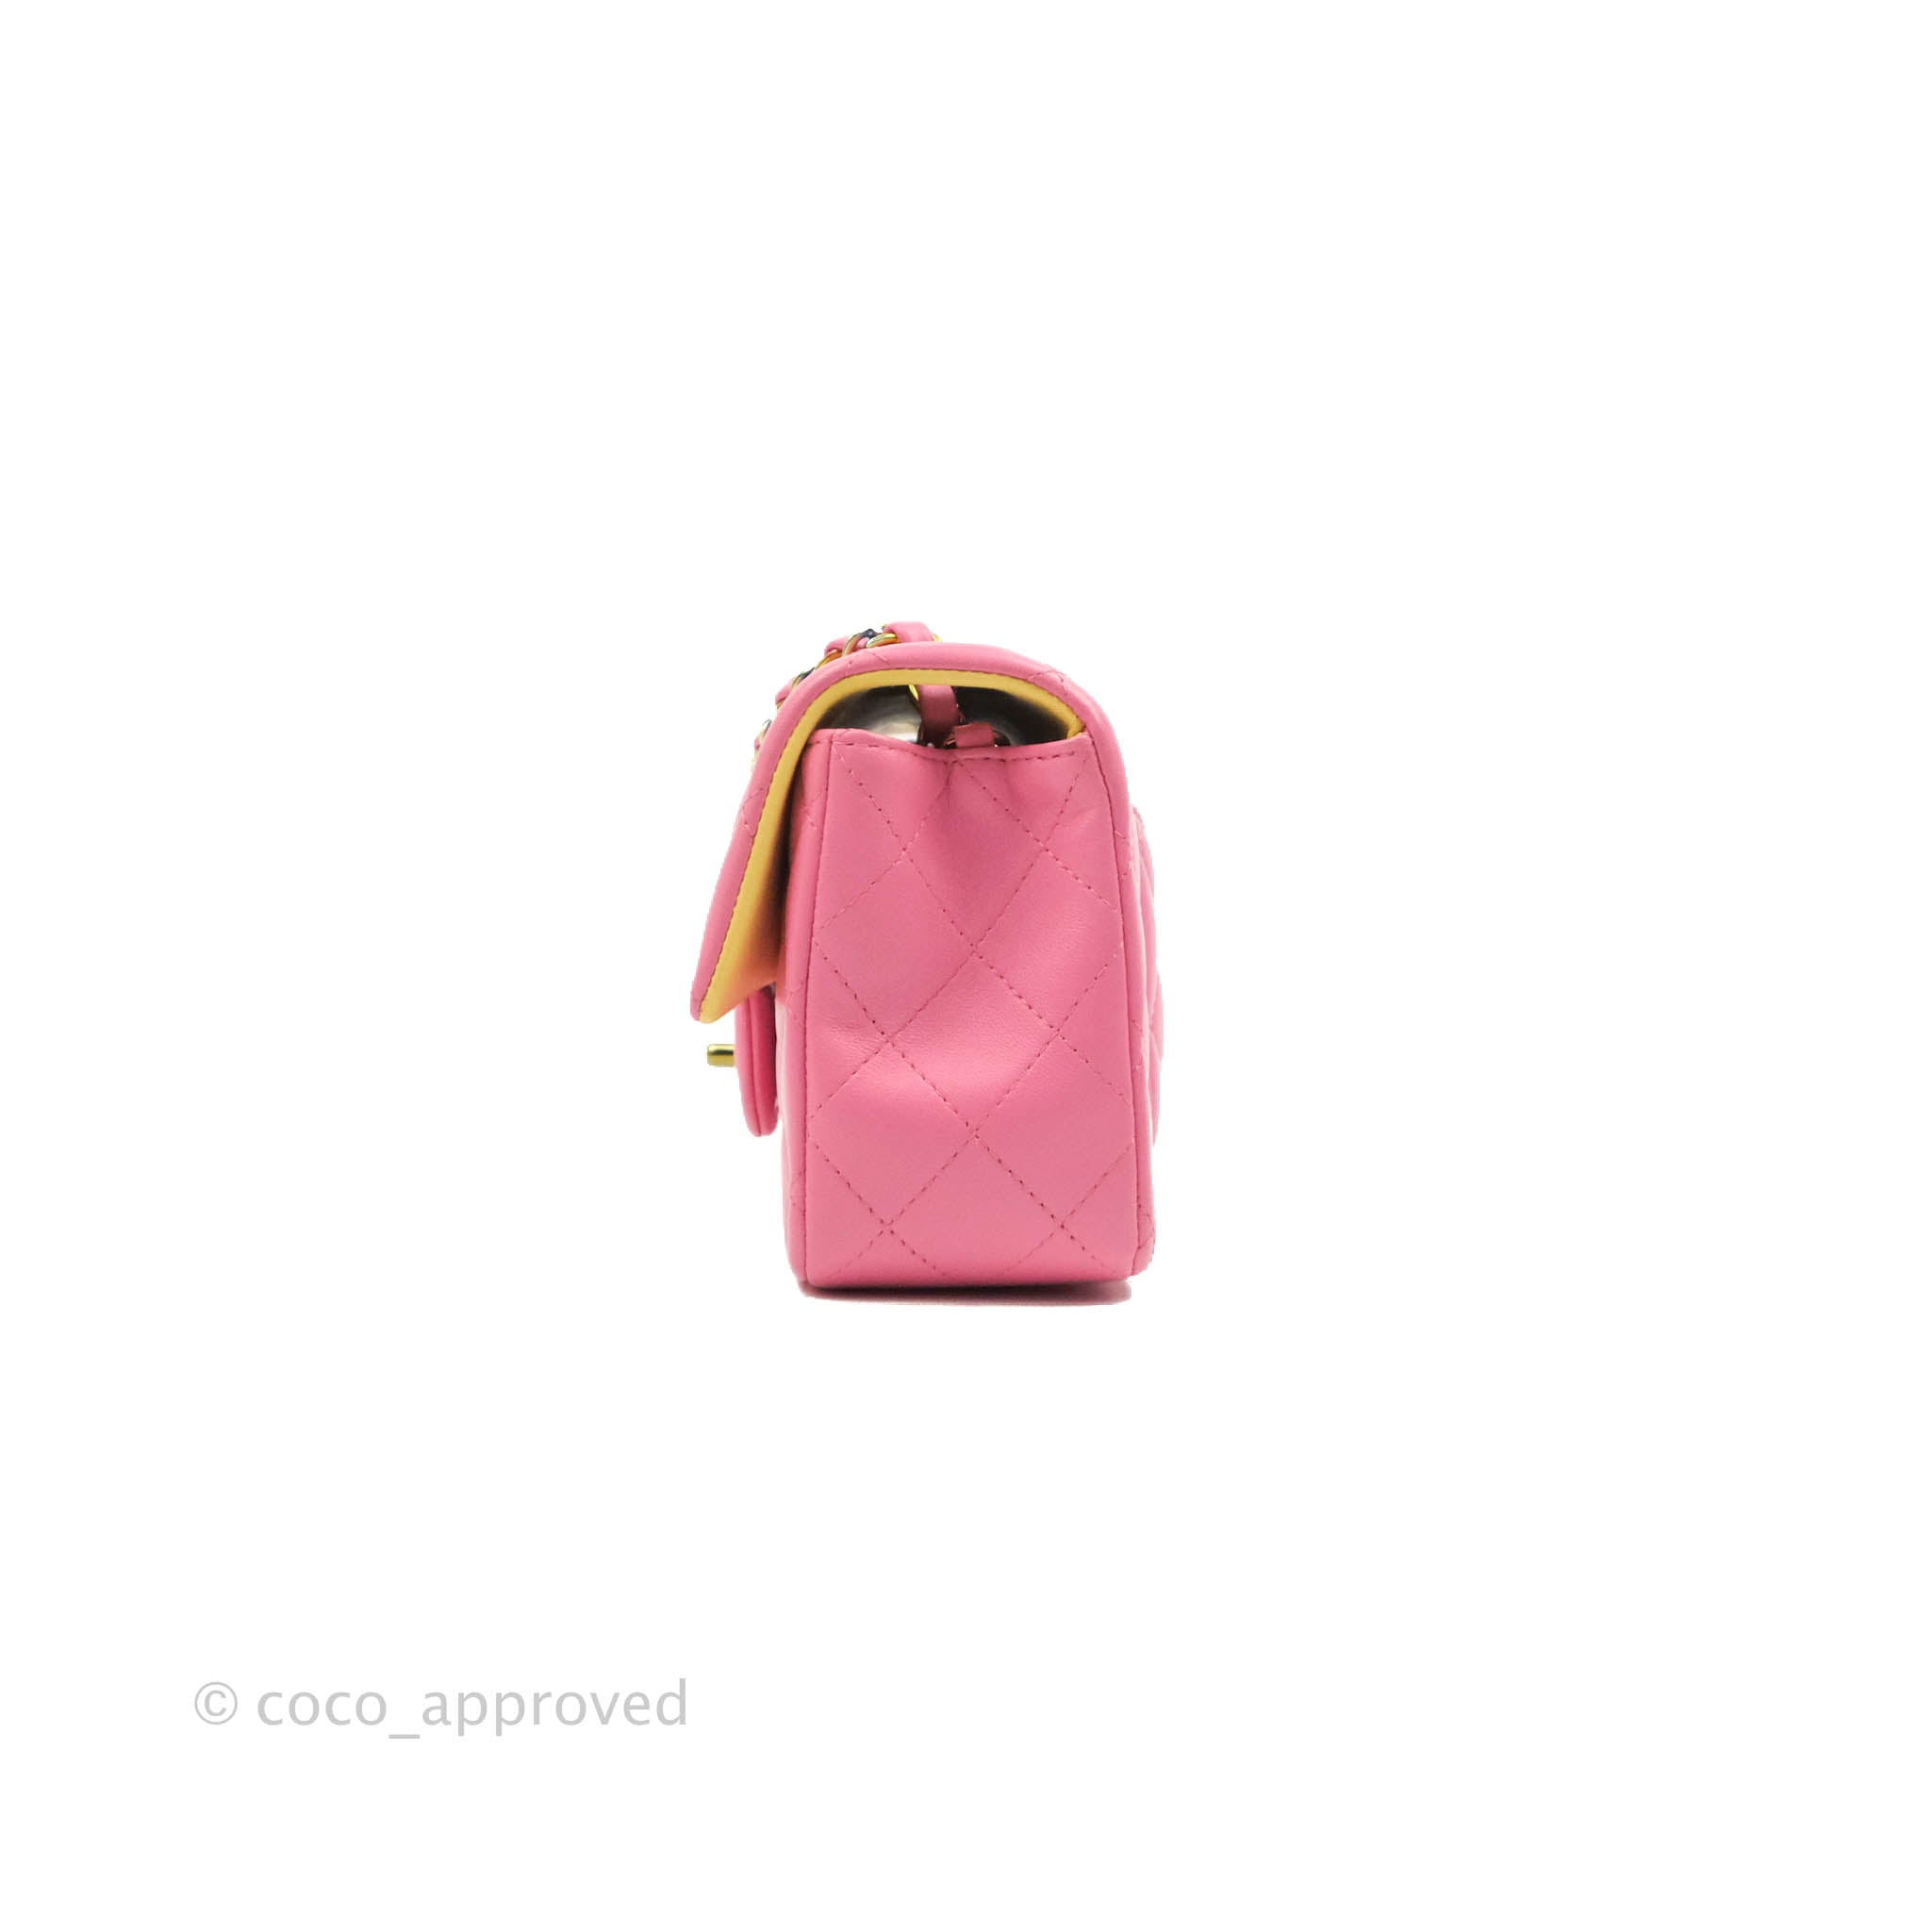 Sold at Auction: Small Pink Louis Vuitton Embroidered Handbag